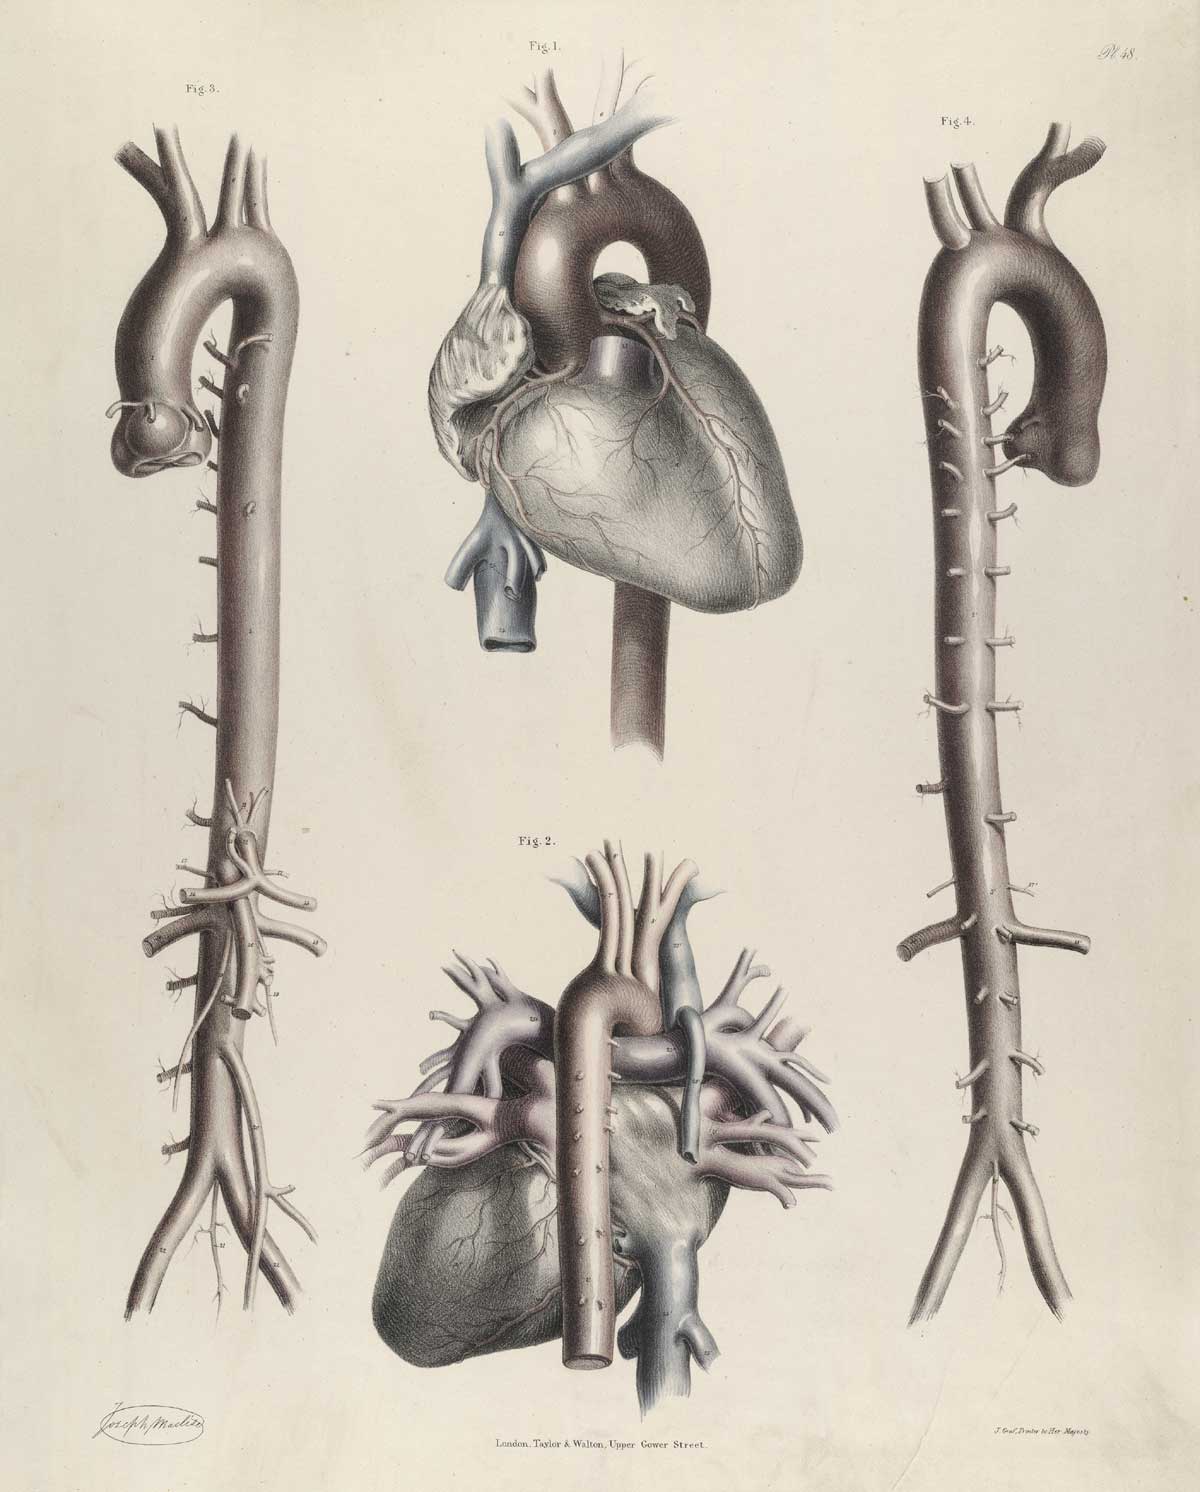 Plate 48 of Quain's The anatomy of the arteries of the human body, with its applications to pathology and operative surgery, featuring four images of the arteries of the heart. Two of the images are of the front and back views of the arteries while the other two images show where the arteries attach to the heart.